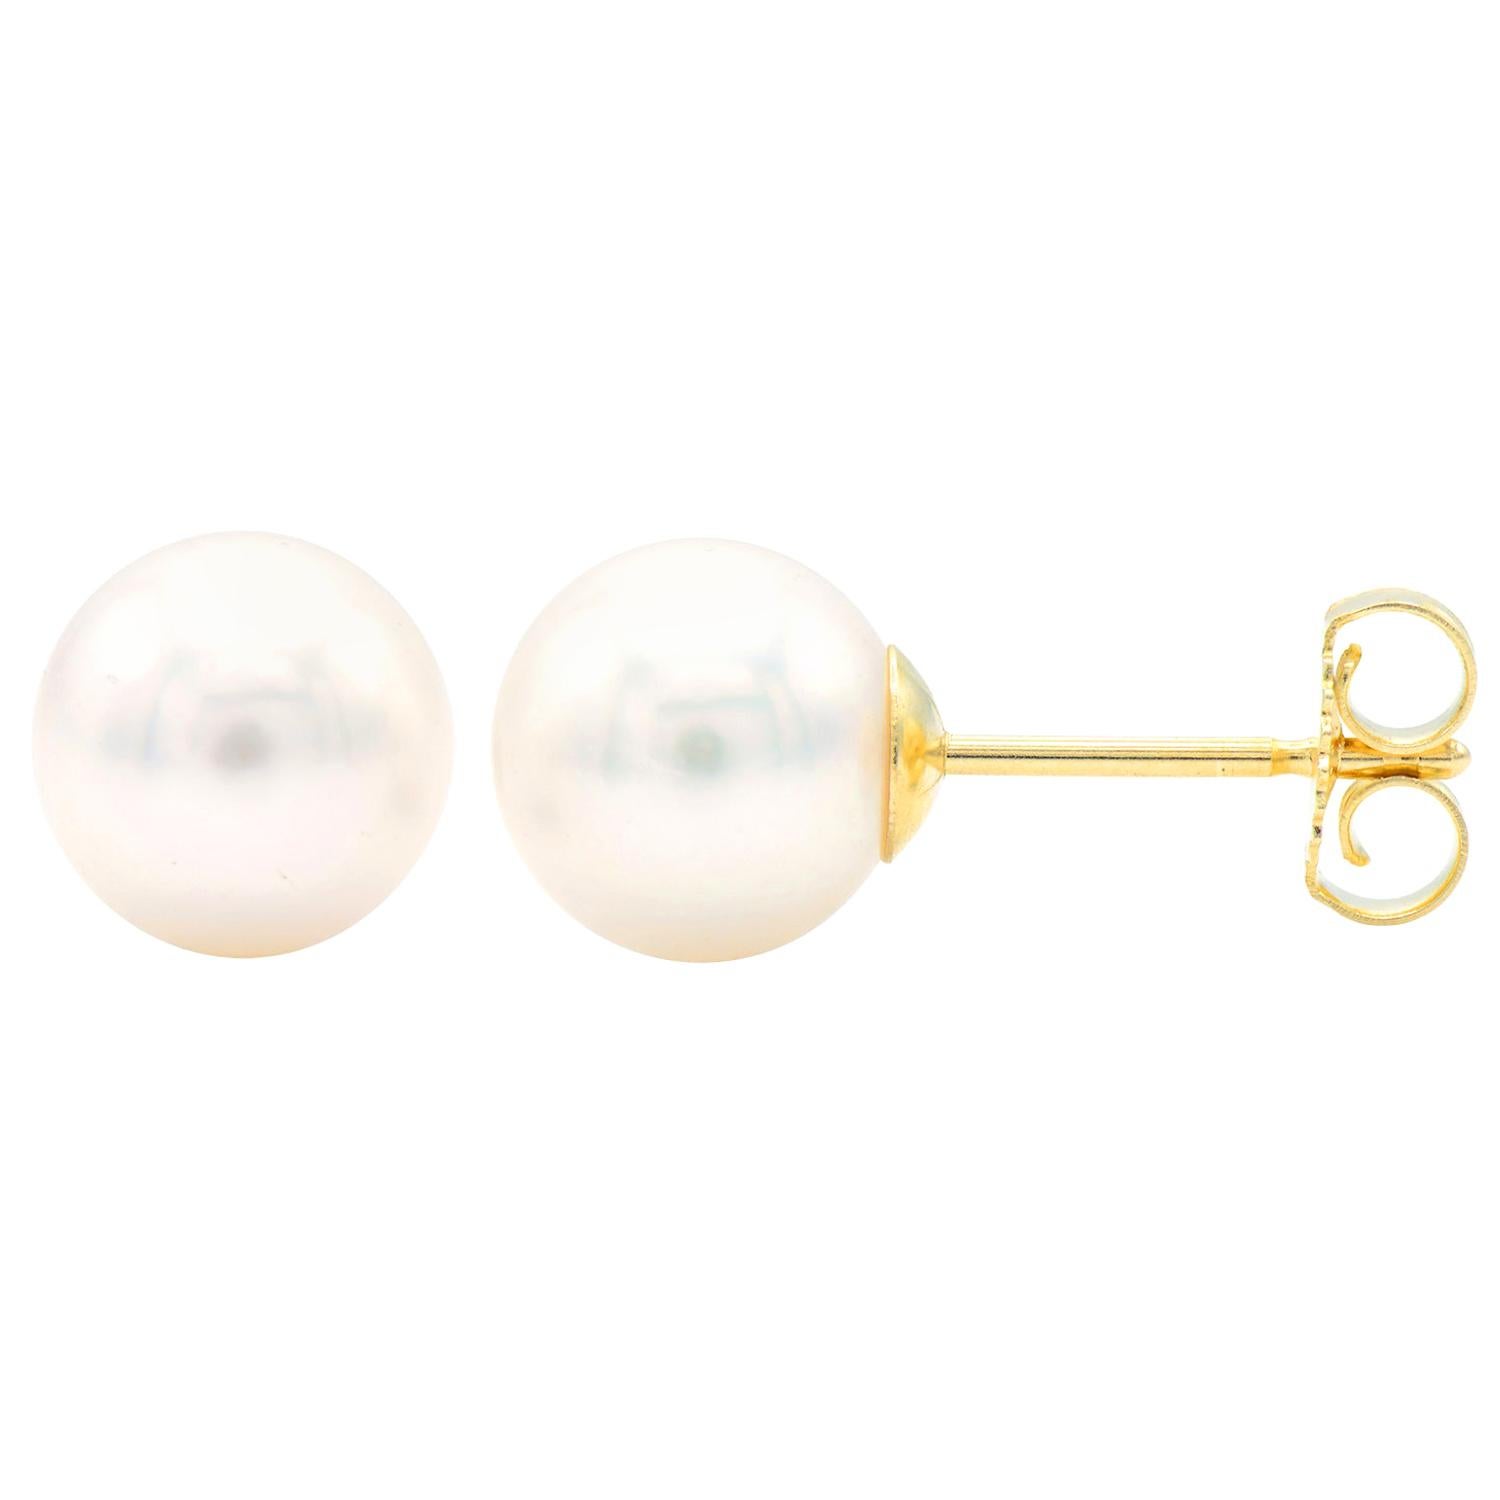 7.5-8mm Cultured Pearl Stud Earrings with 14 Karat Yellow Gold Posts and Backs For Sale